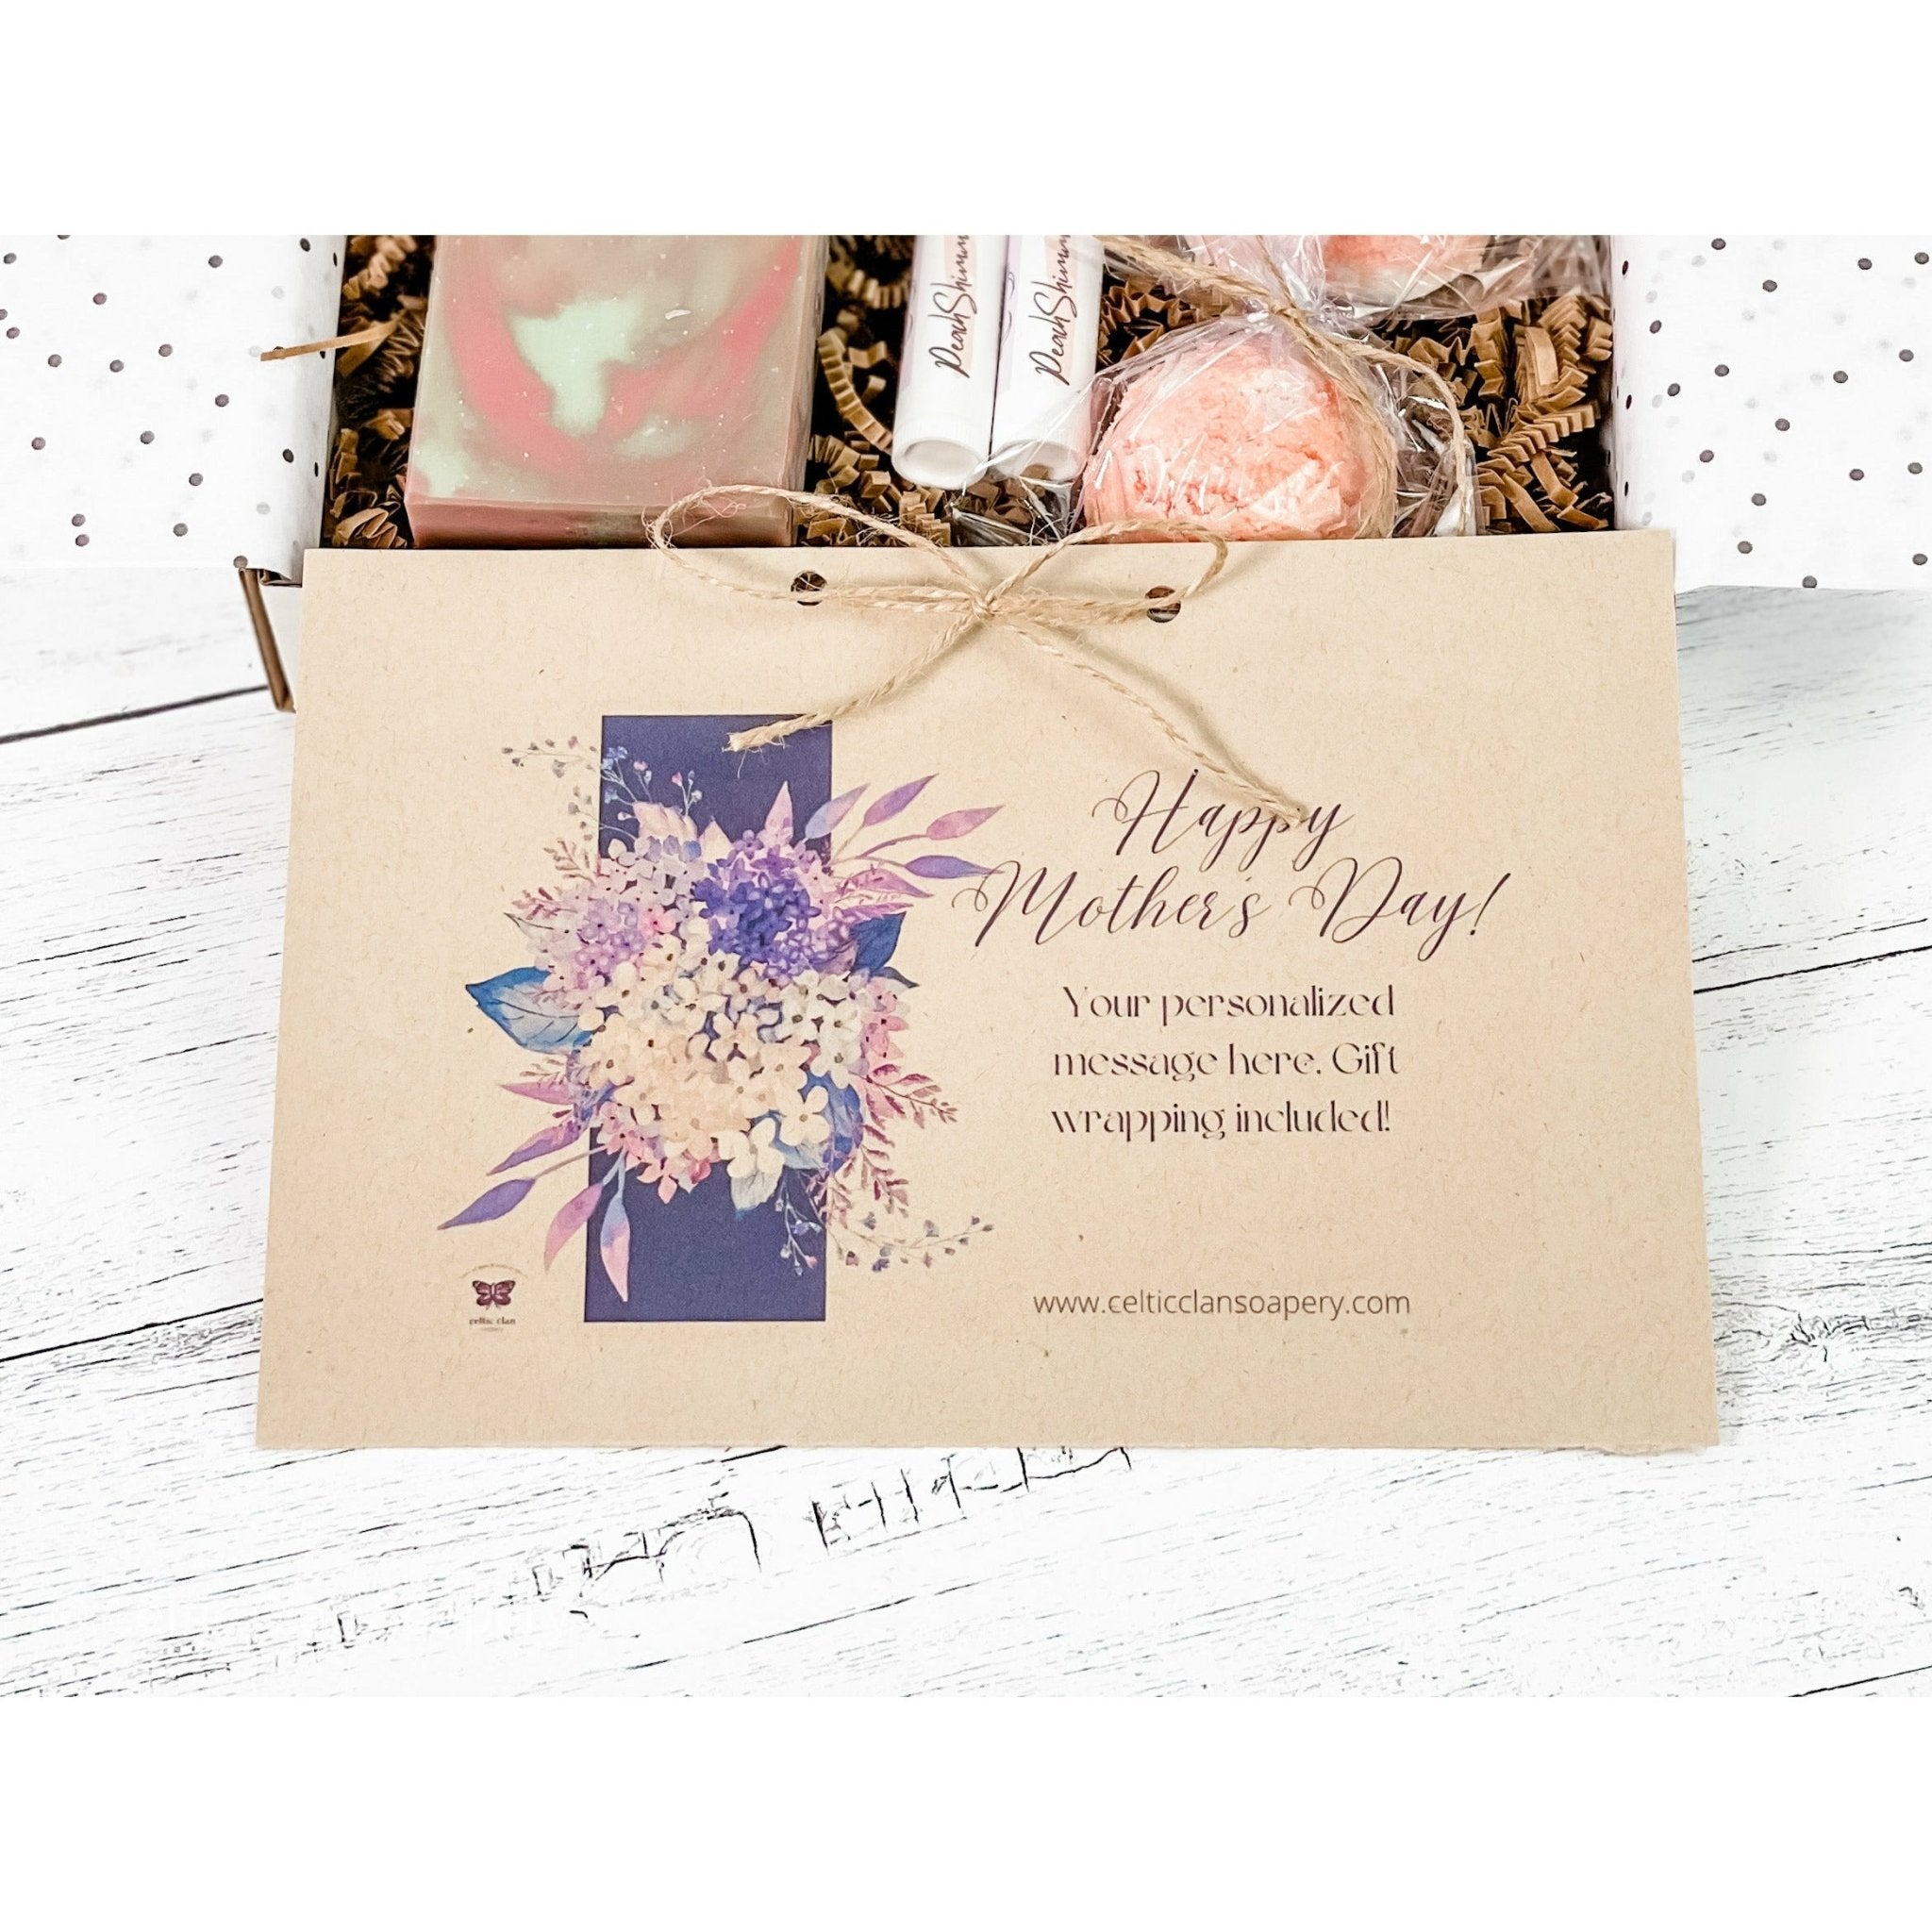 Personalized Bath and Body Gift Set | Peach Champagne | Greeting Card - Celtic Clan Soapery LLC